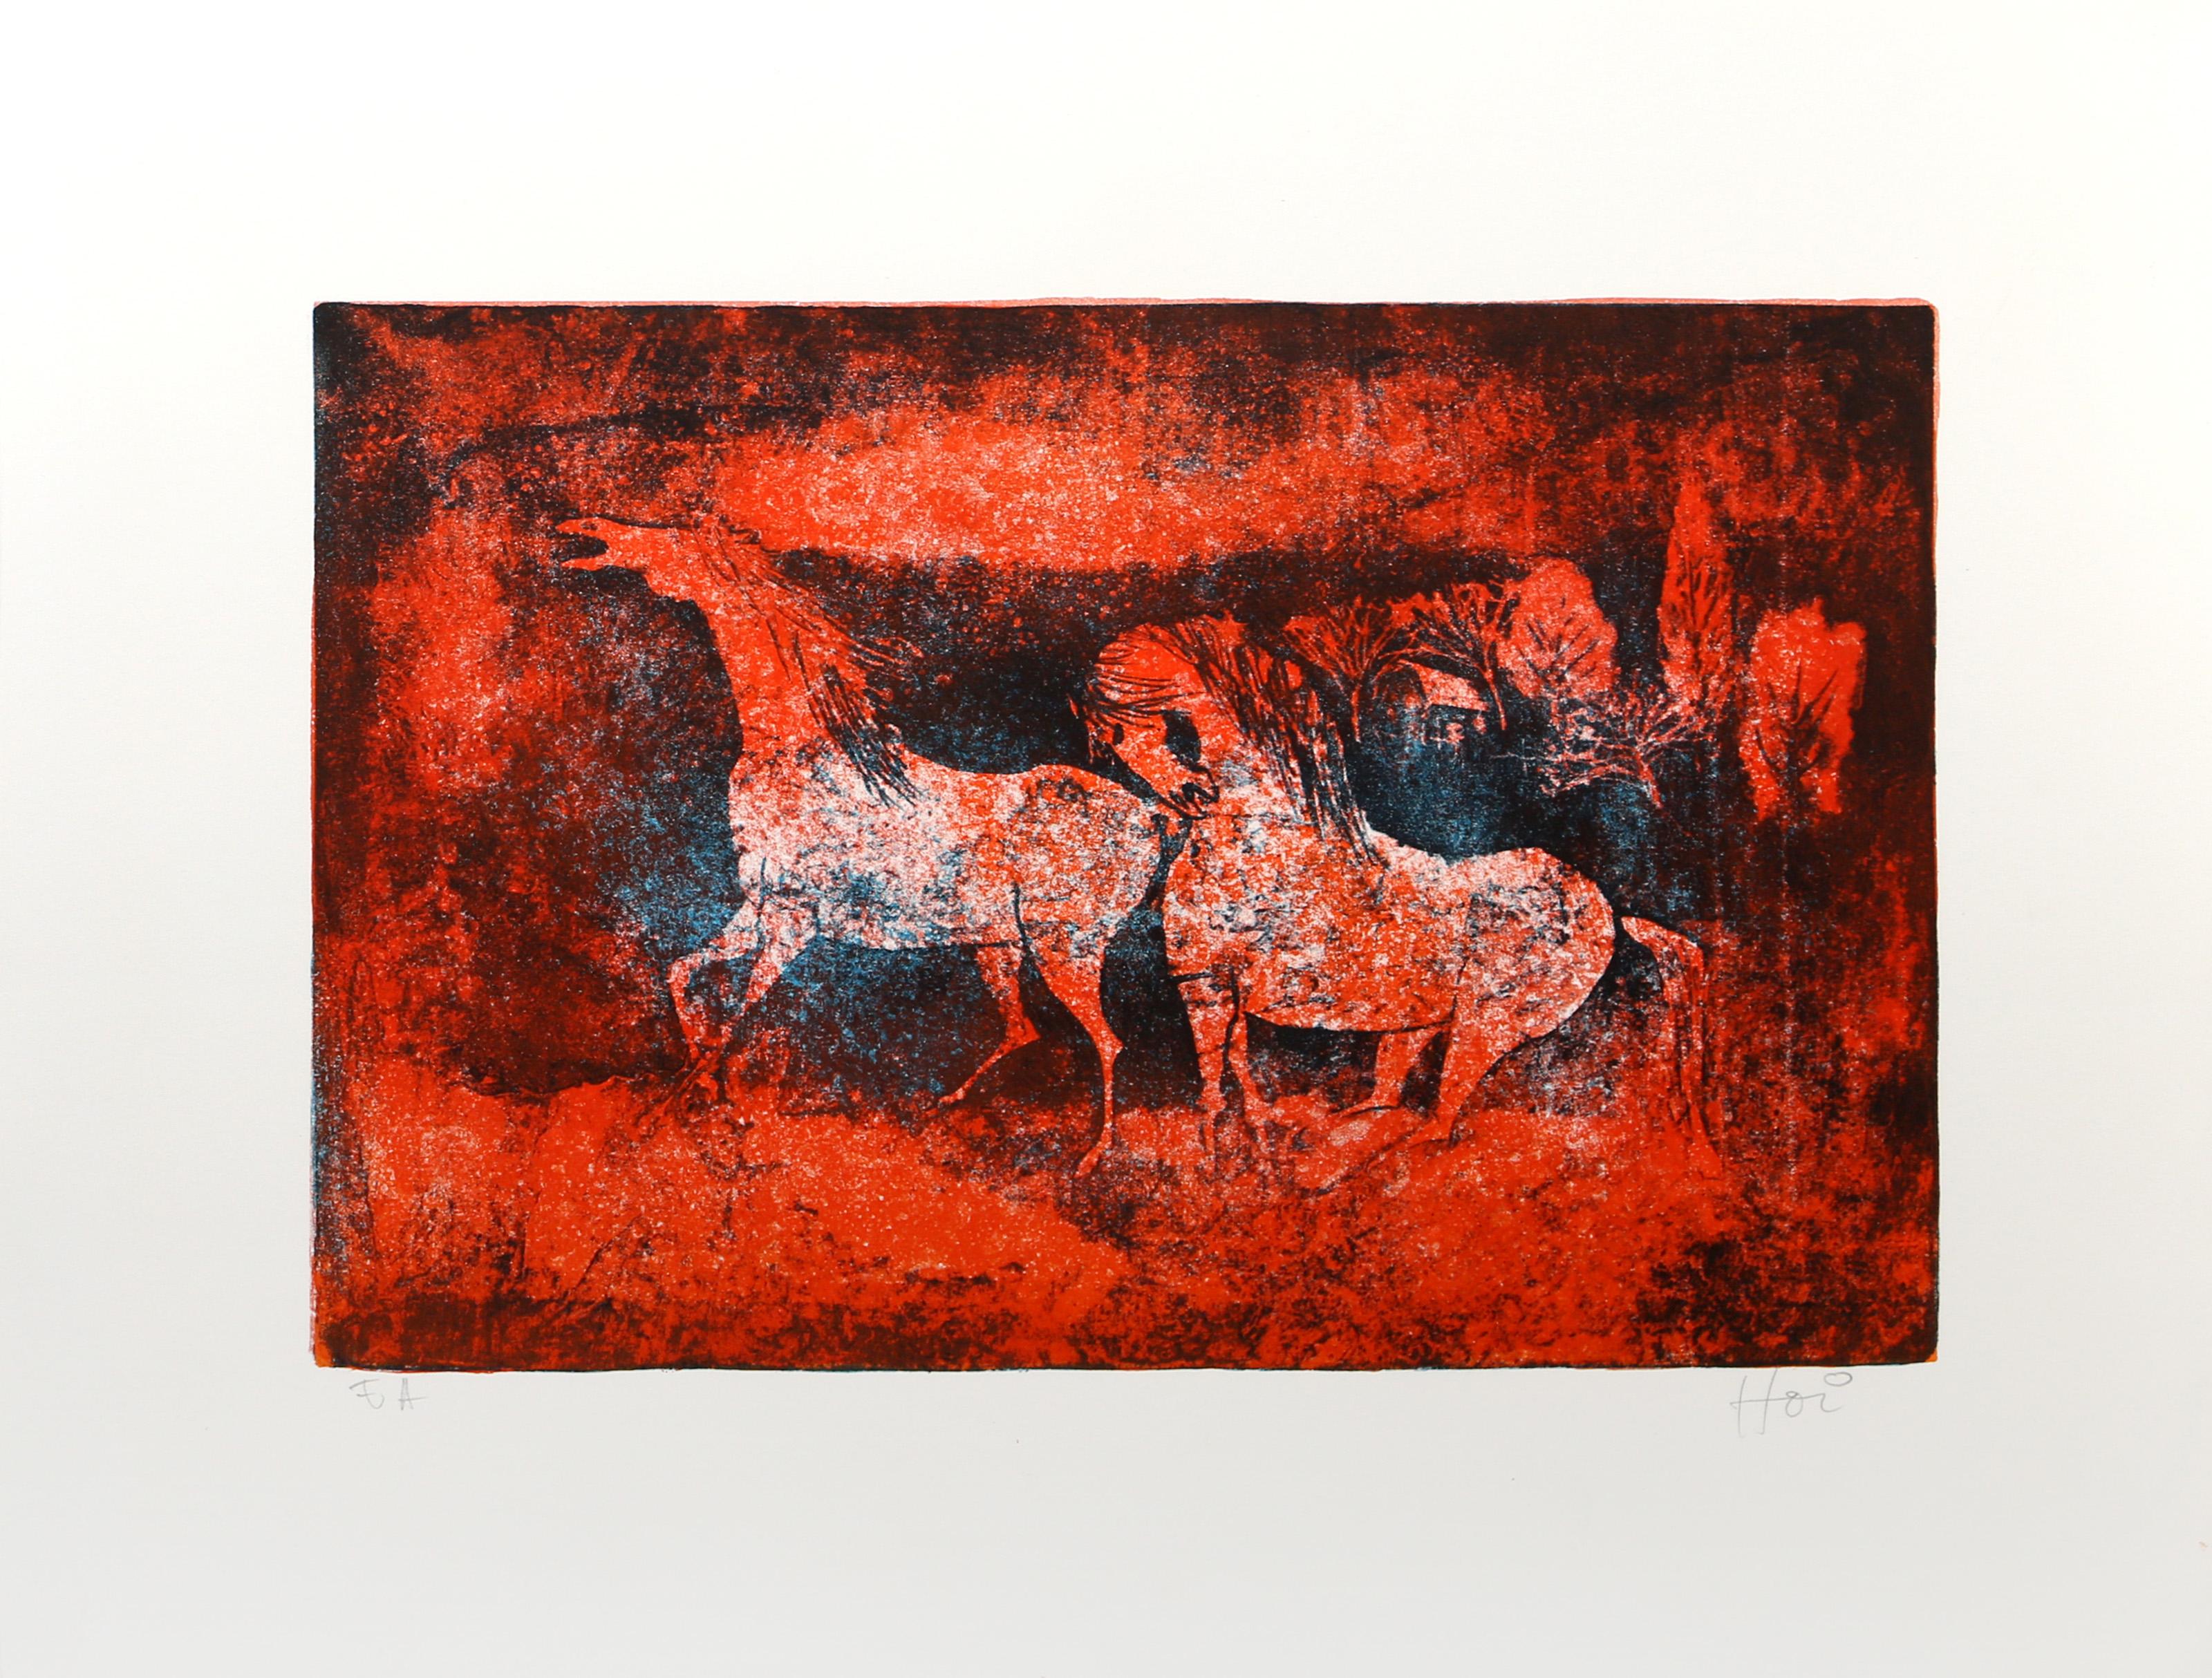 Lebadang (aka Hoi), Vietnamese (1922 - 2015) -  Horses in Red and Blue. Medium: Lithograph on Rives BFK, signed "Hoi" and numbered in pencil, Edition: E.A., Image Size: 12.5 x 18 inches, Size: 19.5 x 25.5 in. (49.53 x 64.77 cm), Description: